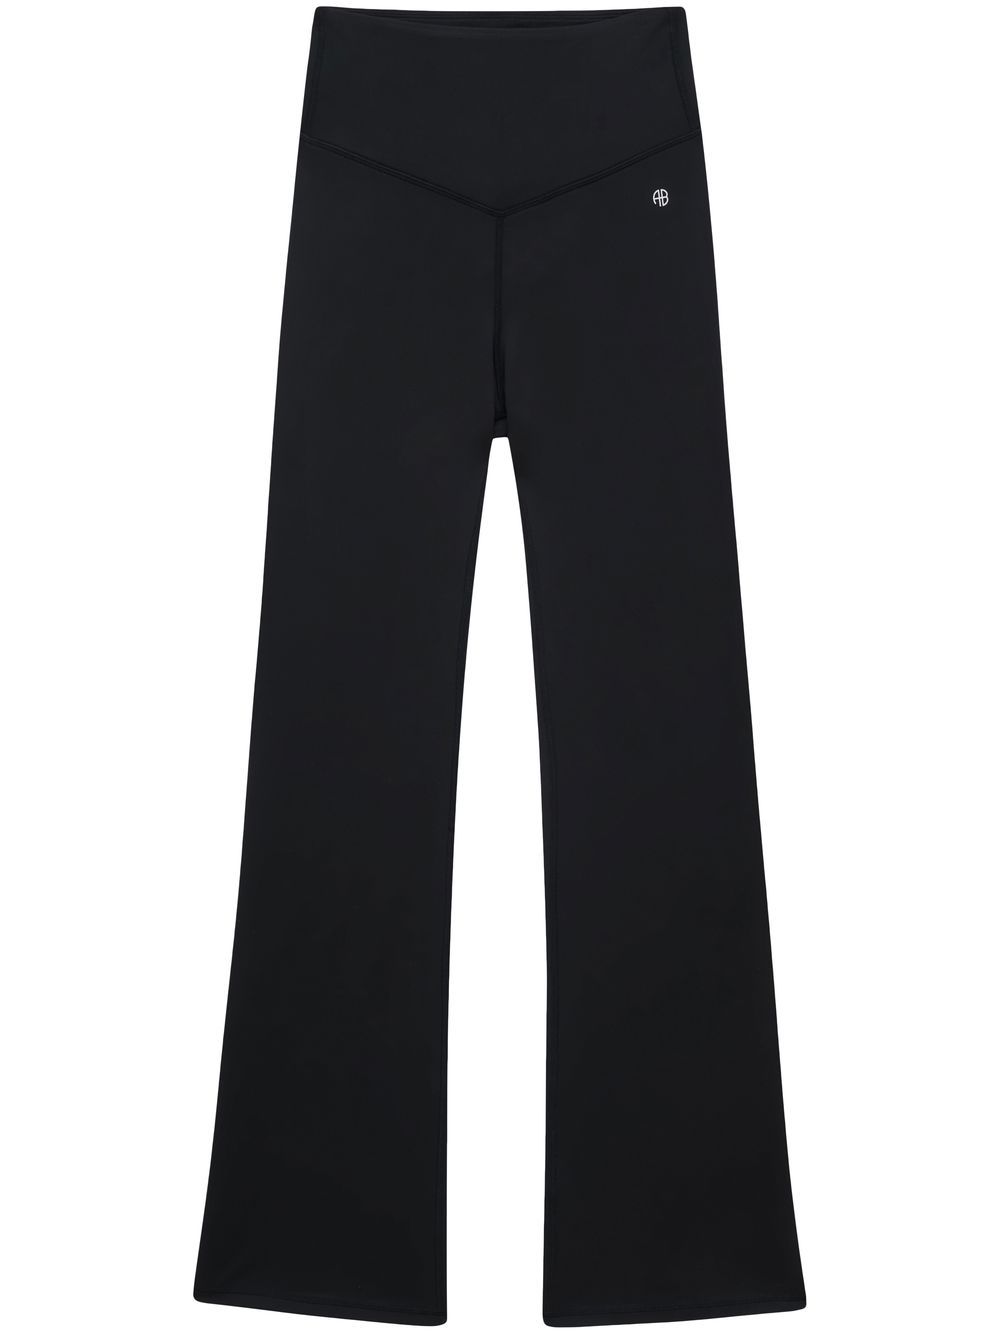 ANINE BING Sophie flared sports trousers - Black